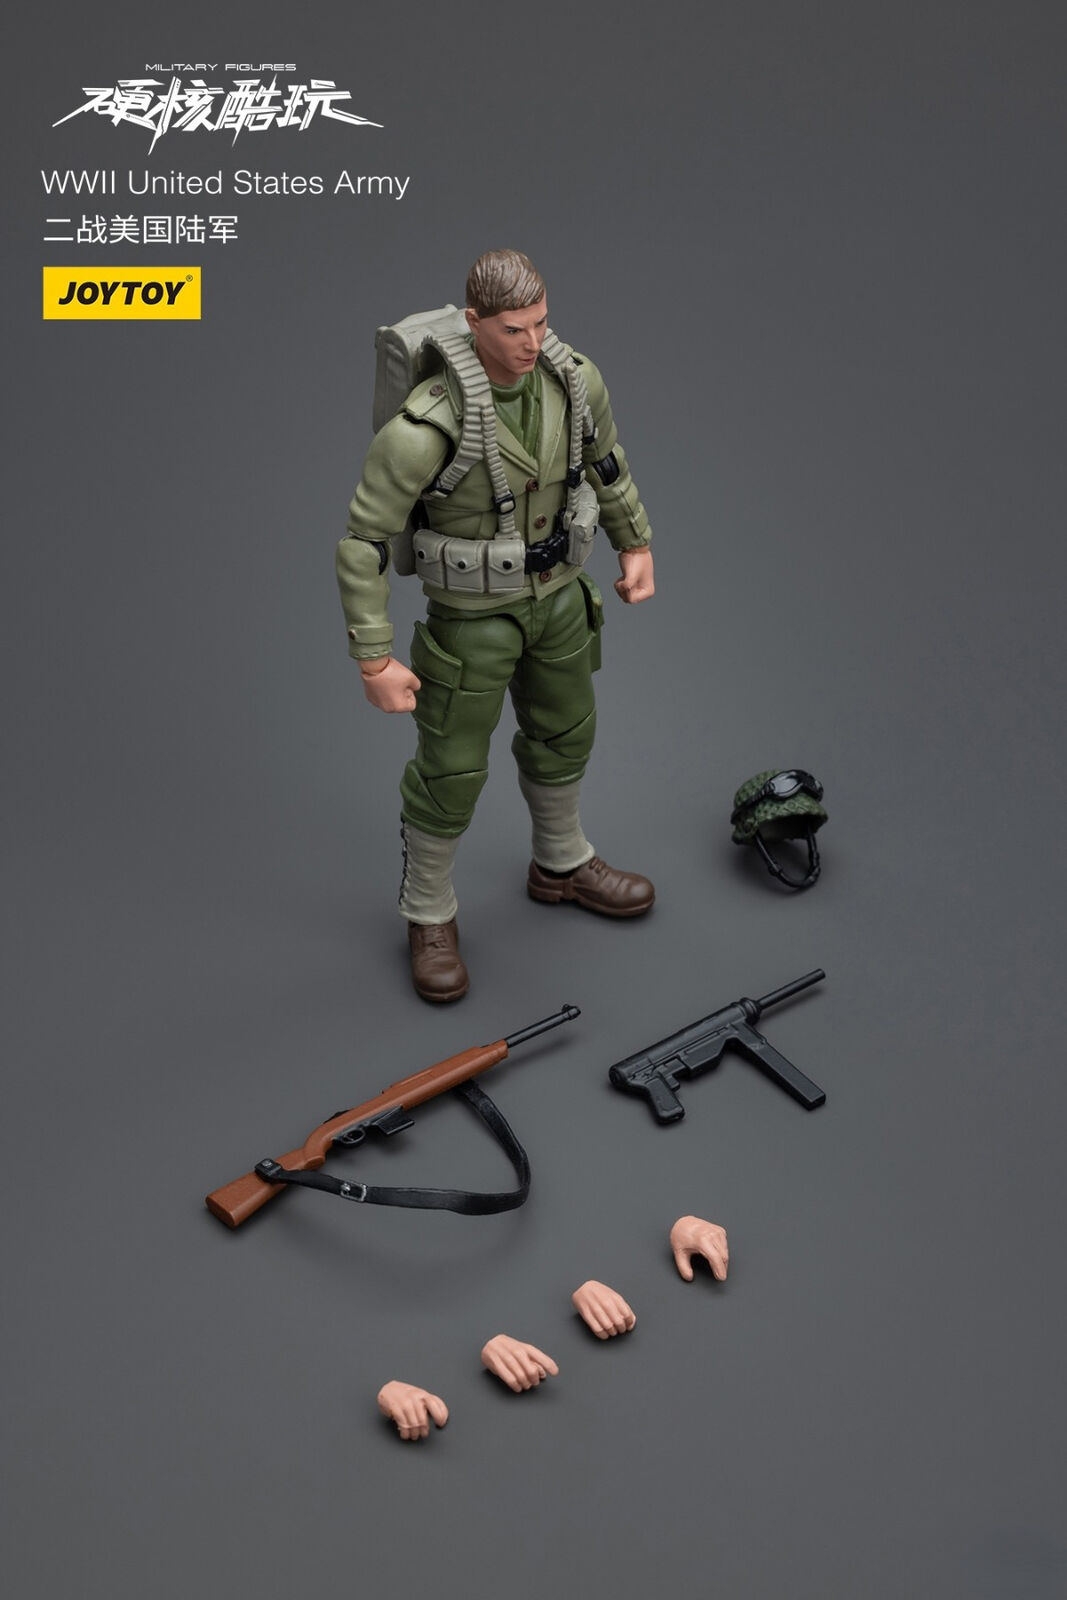 JOYTOY Military Figure 1:18 WWII Soldier Model Toy Figure Kit New IN Stock